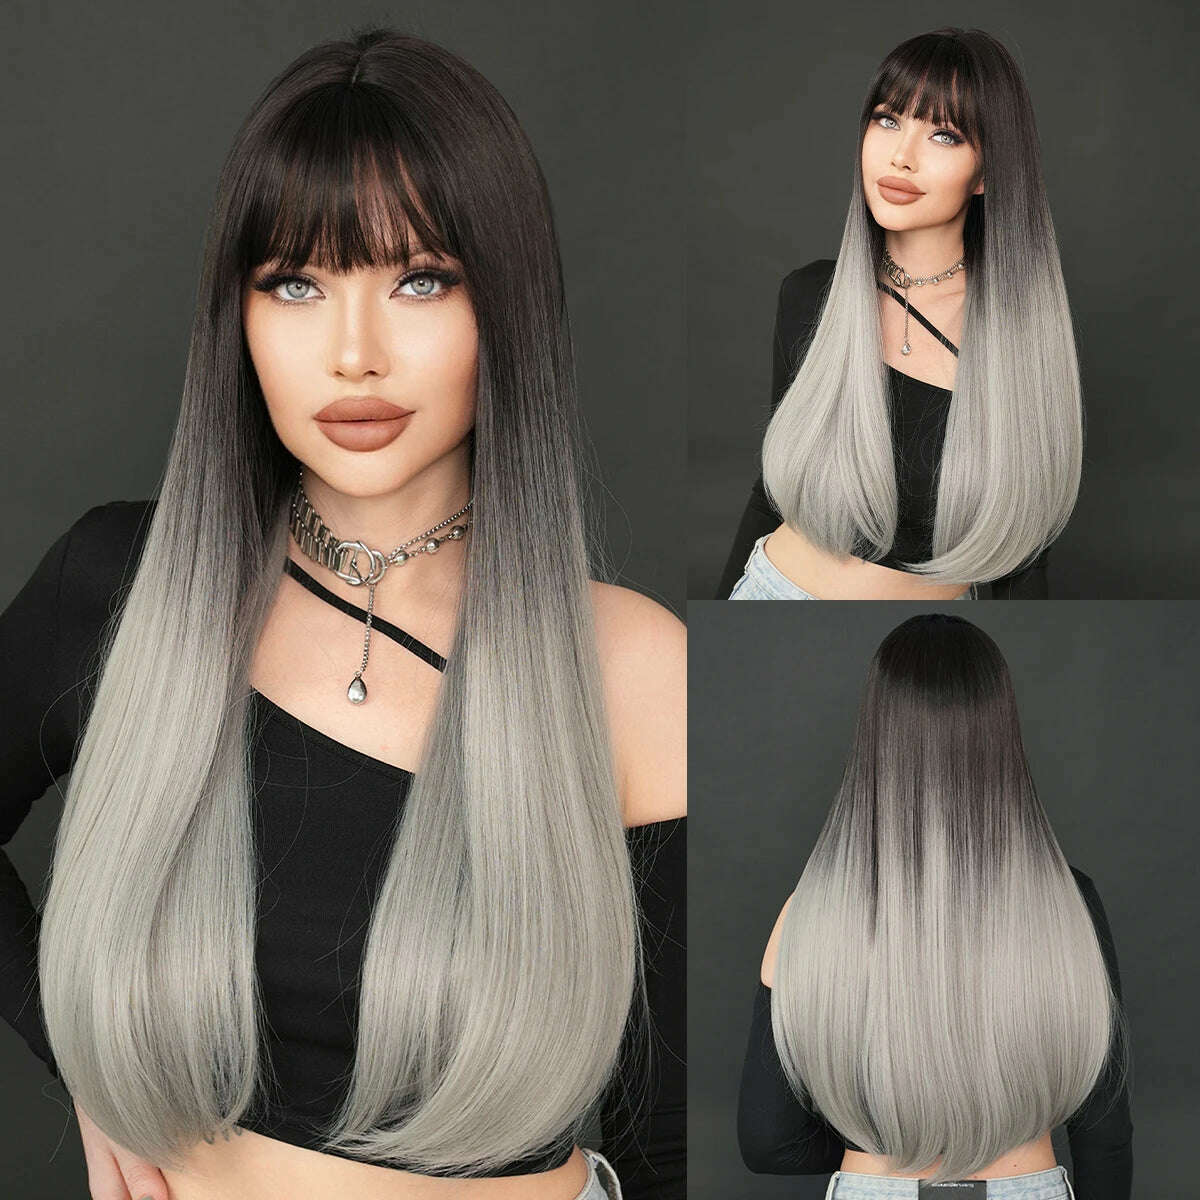 KIMLUD, NAMM Long Body Straight Silver Ash Hair Wig With Bangs For Women Daily Party High Density Hair Ombre Wigs Heat Resistant Fiber, MW9132-3, KIMLUD Womens Clothes